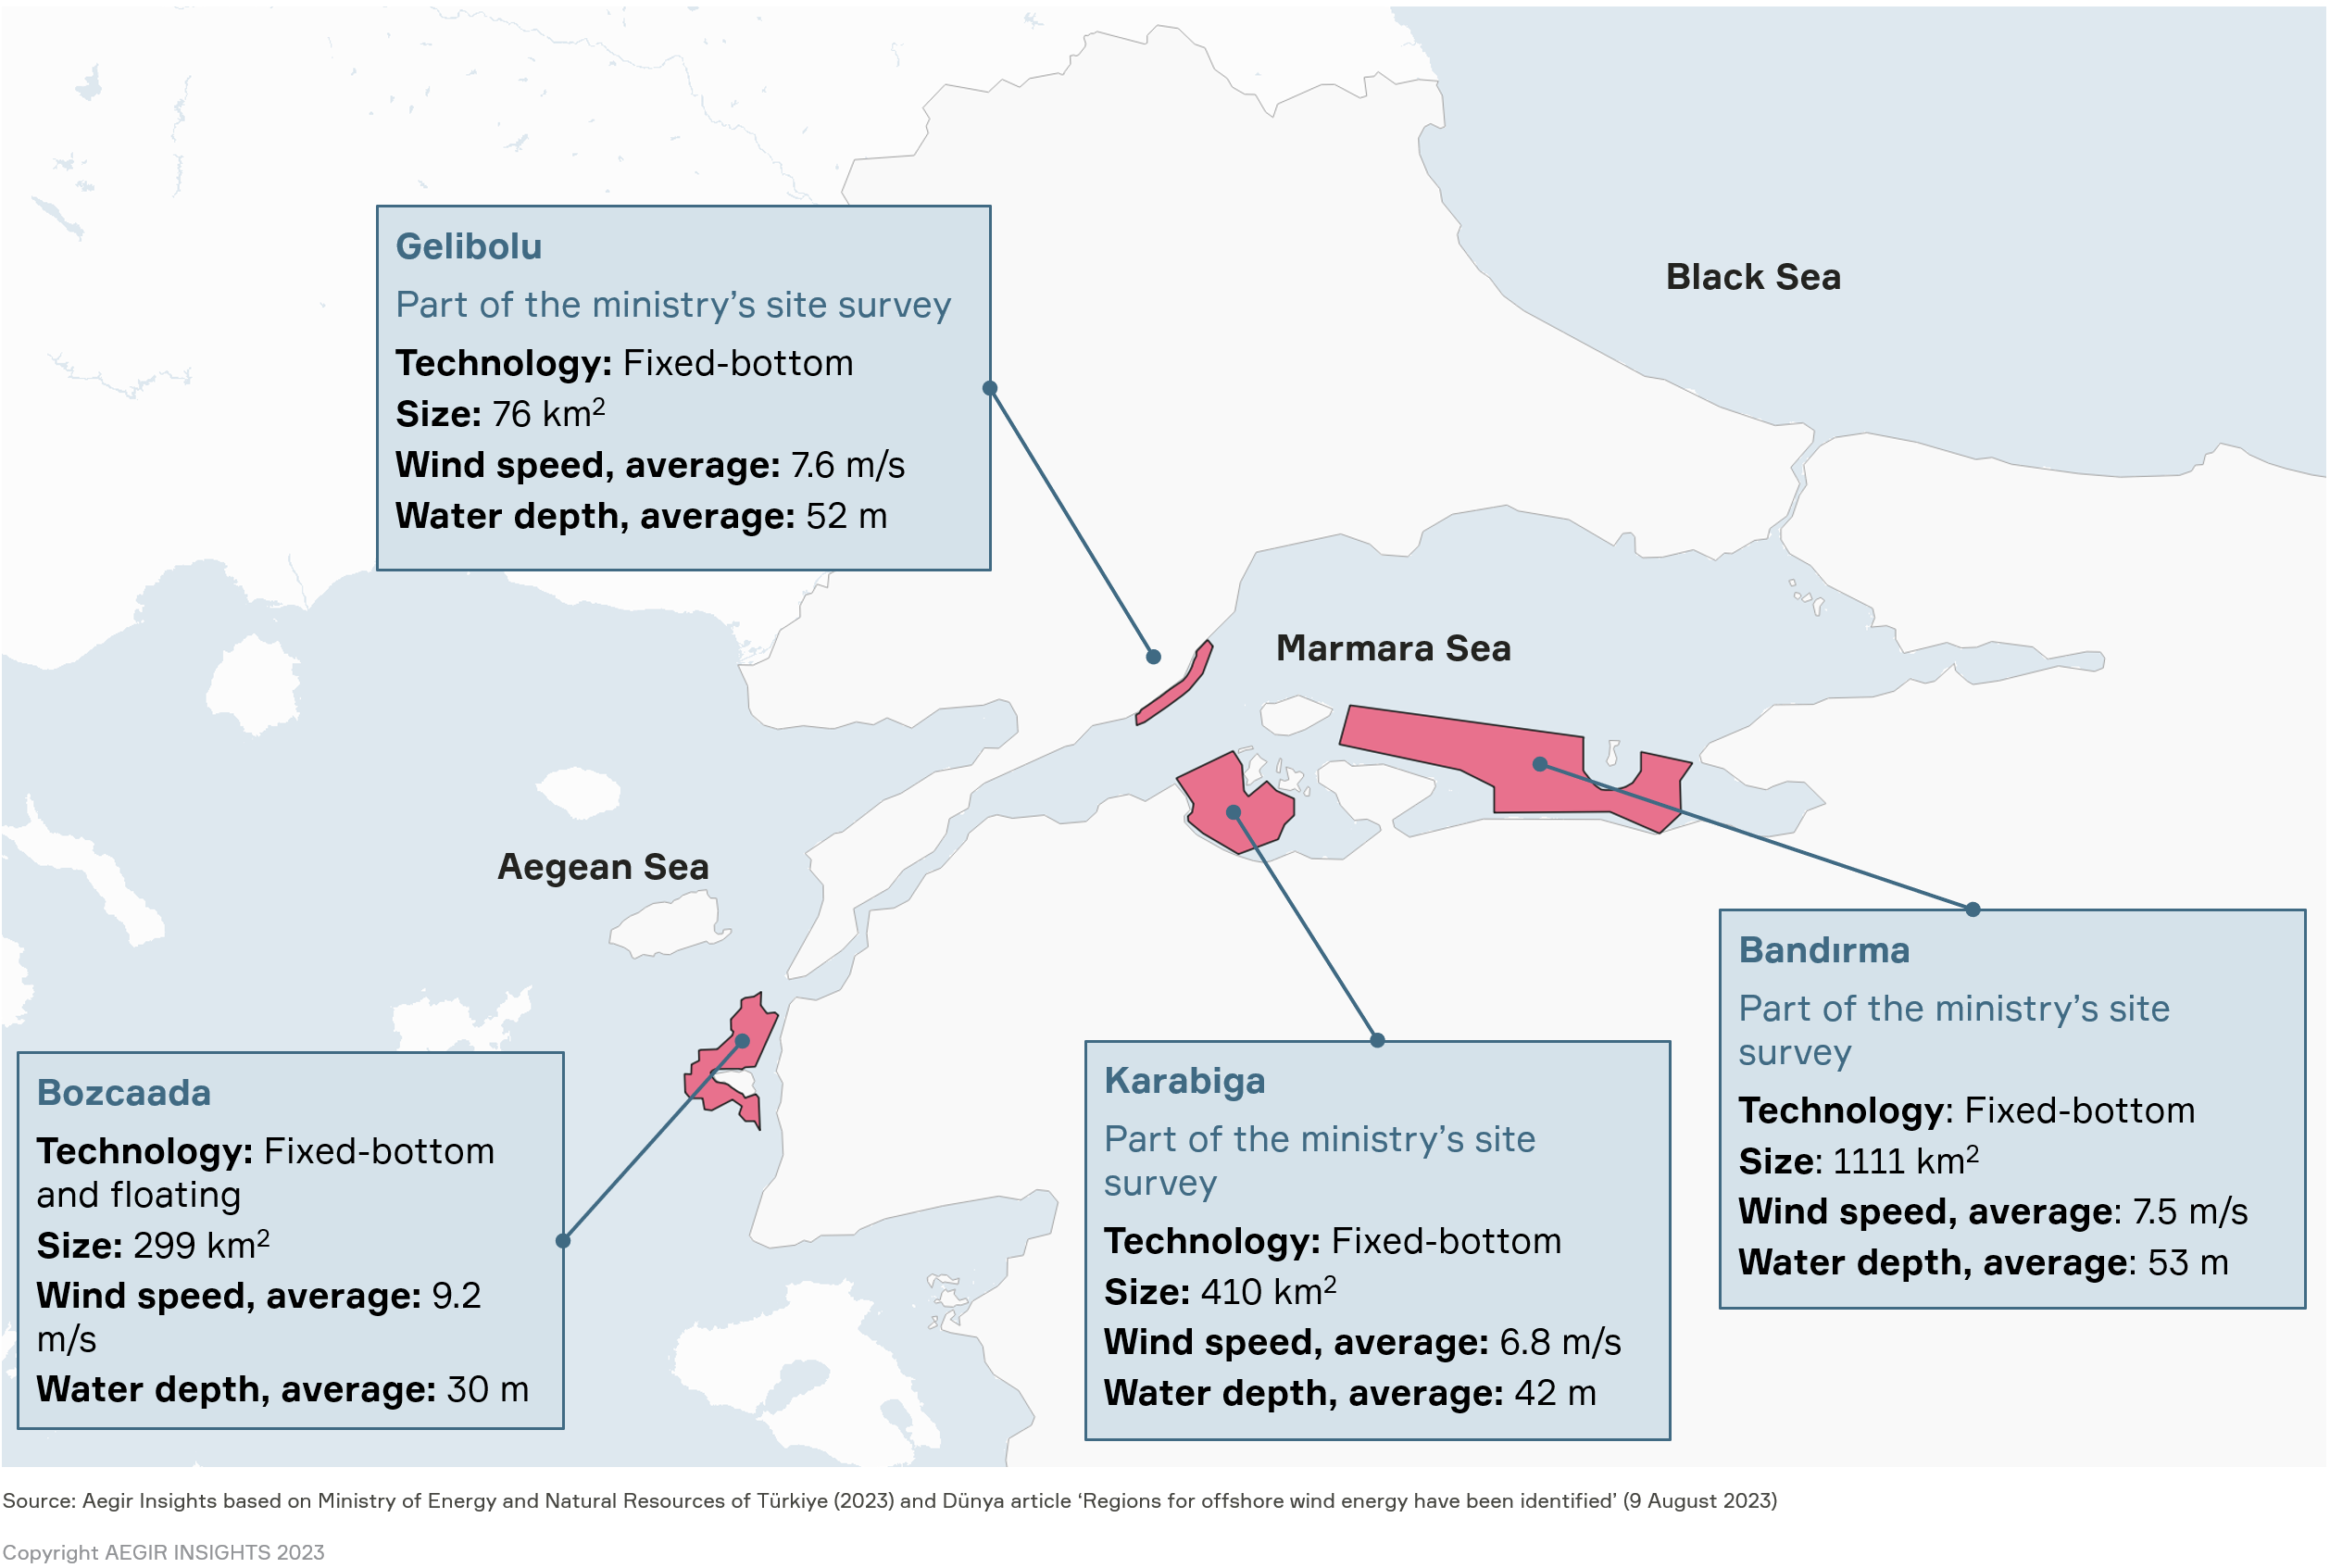 Türkiye’s offshore wind: Map by Aegir Insights on showing Türkiye's four identitfied  potential offshore wind zones, three of which are in the Marmara Sea and part of the ministry's site survey